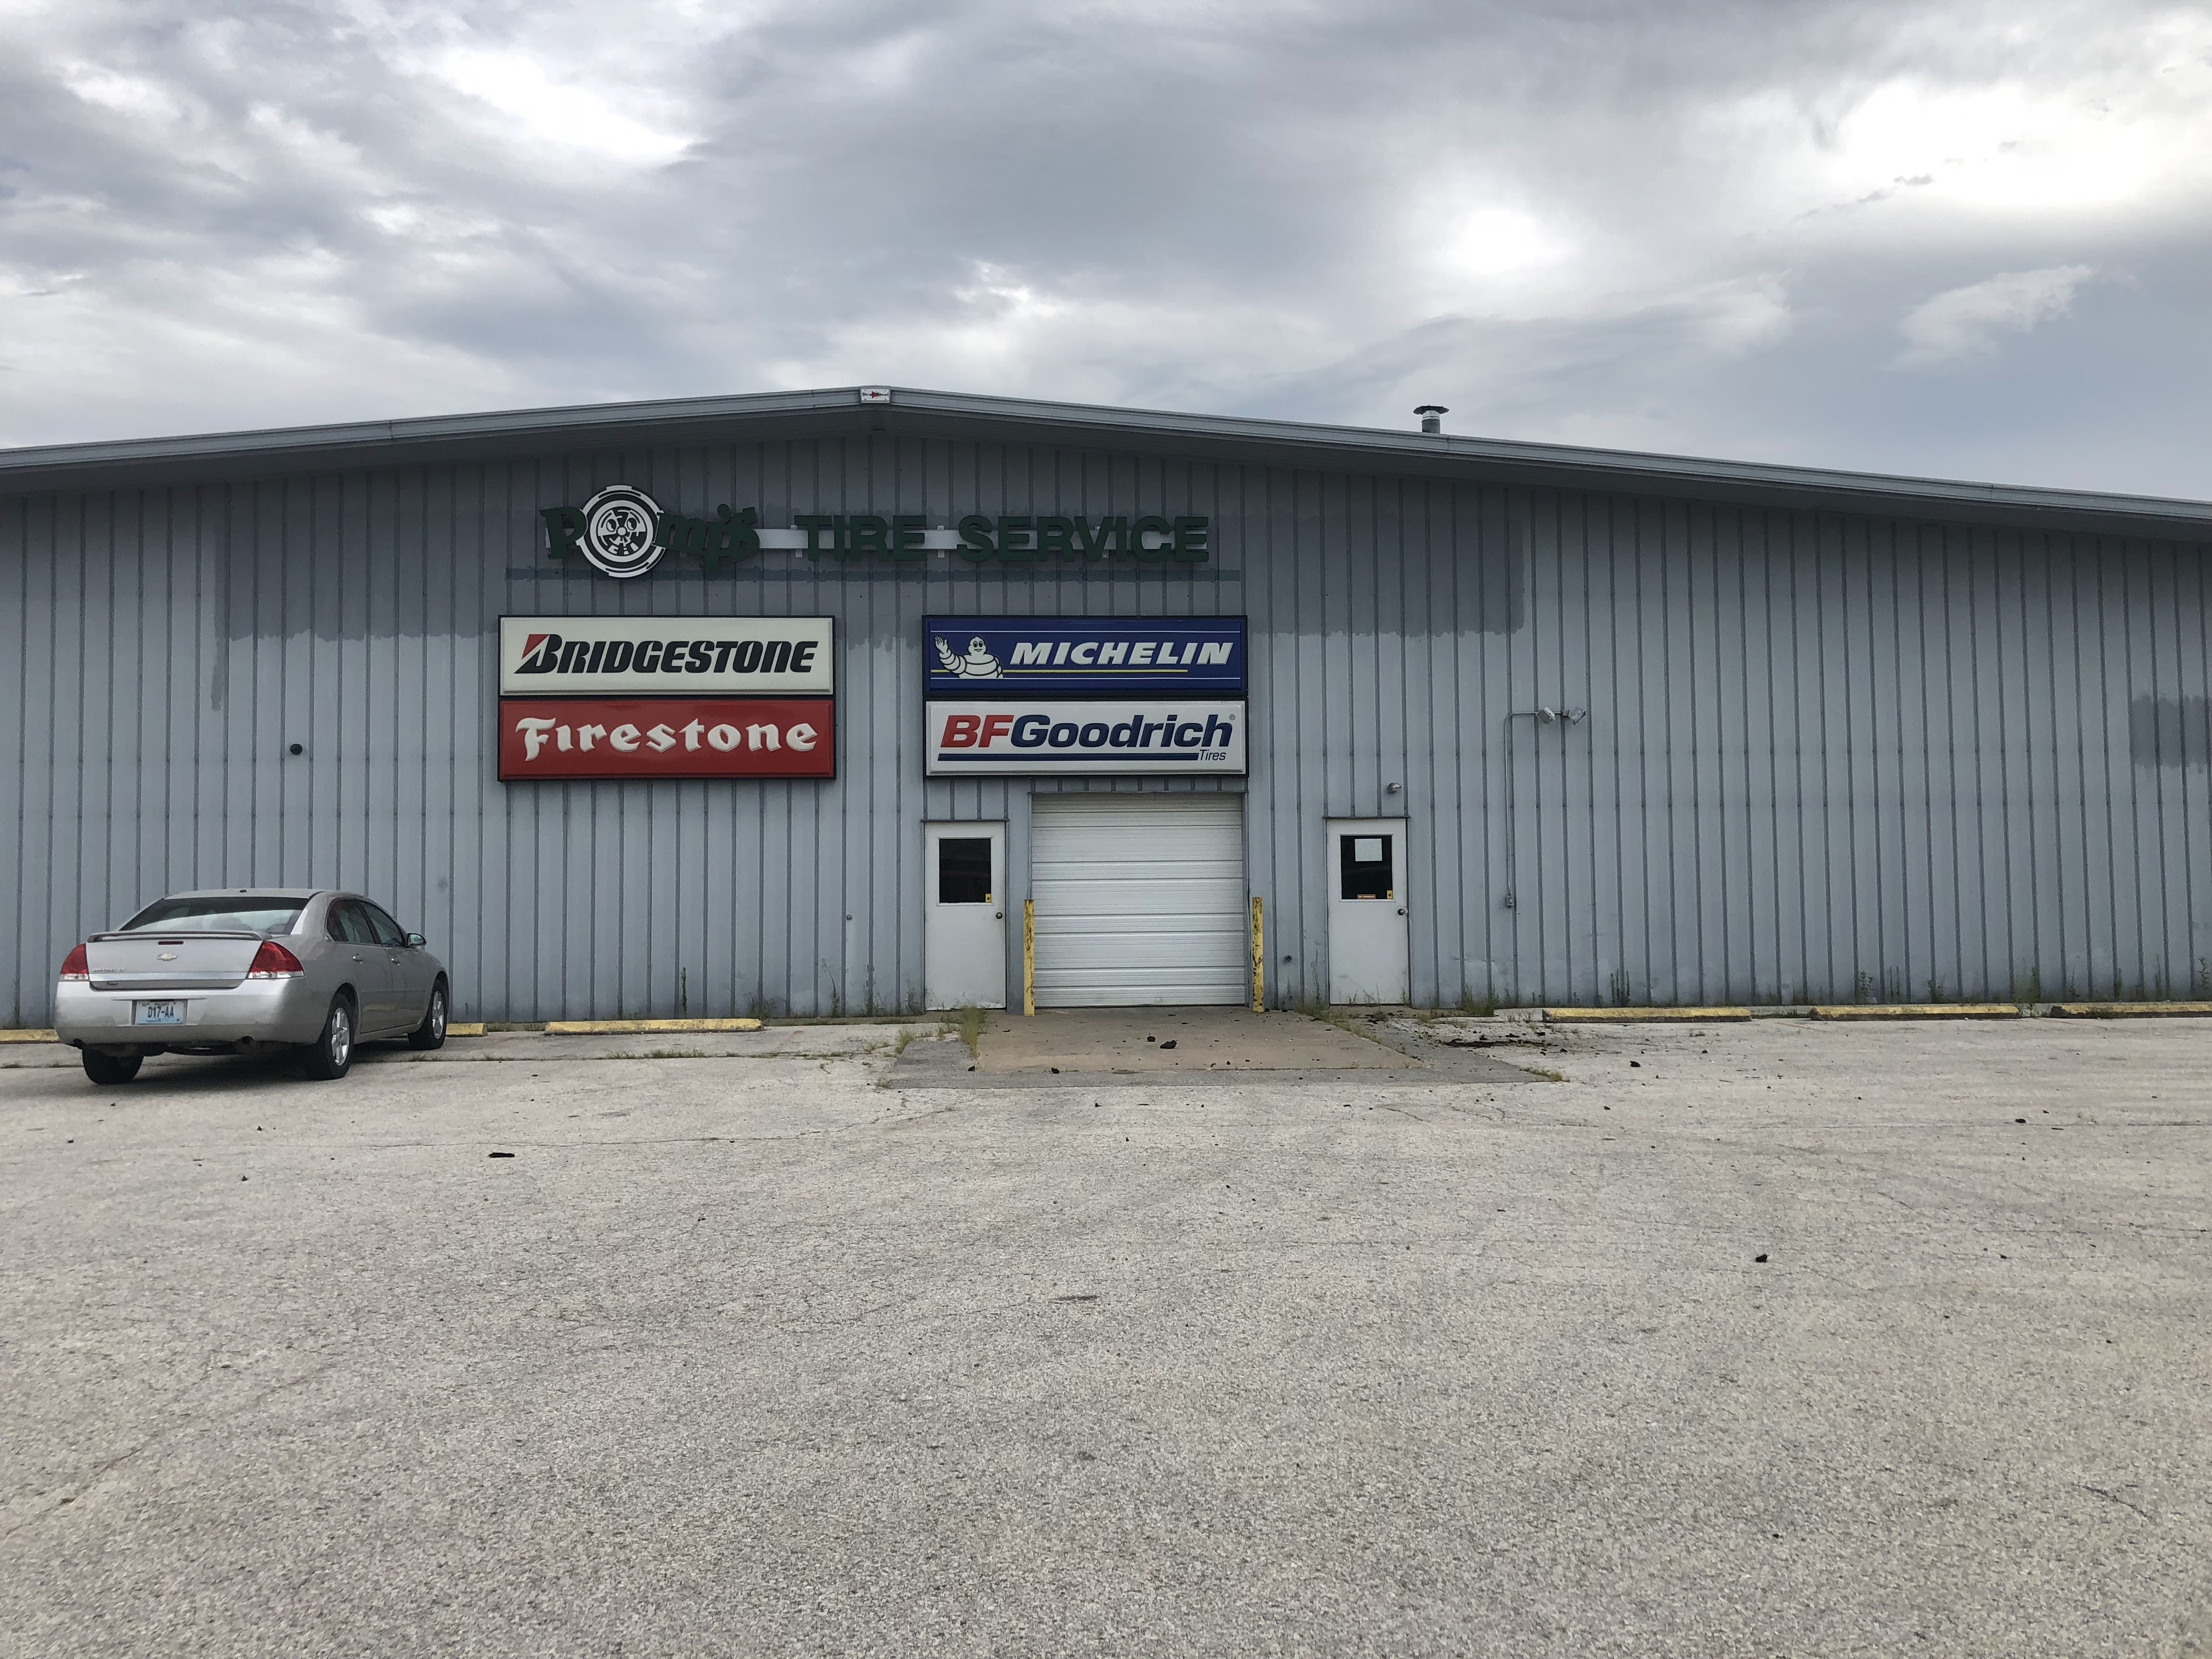 Pomp’s Tire Service - Columbia (MO 65202), US, on off road tires